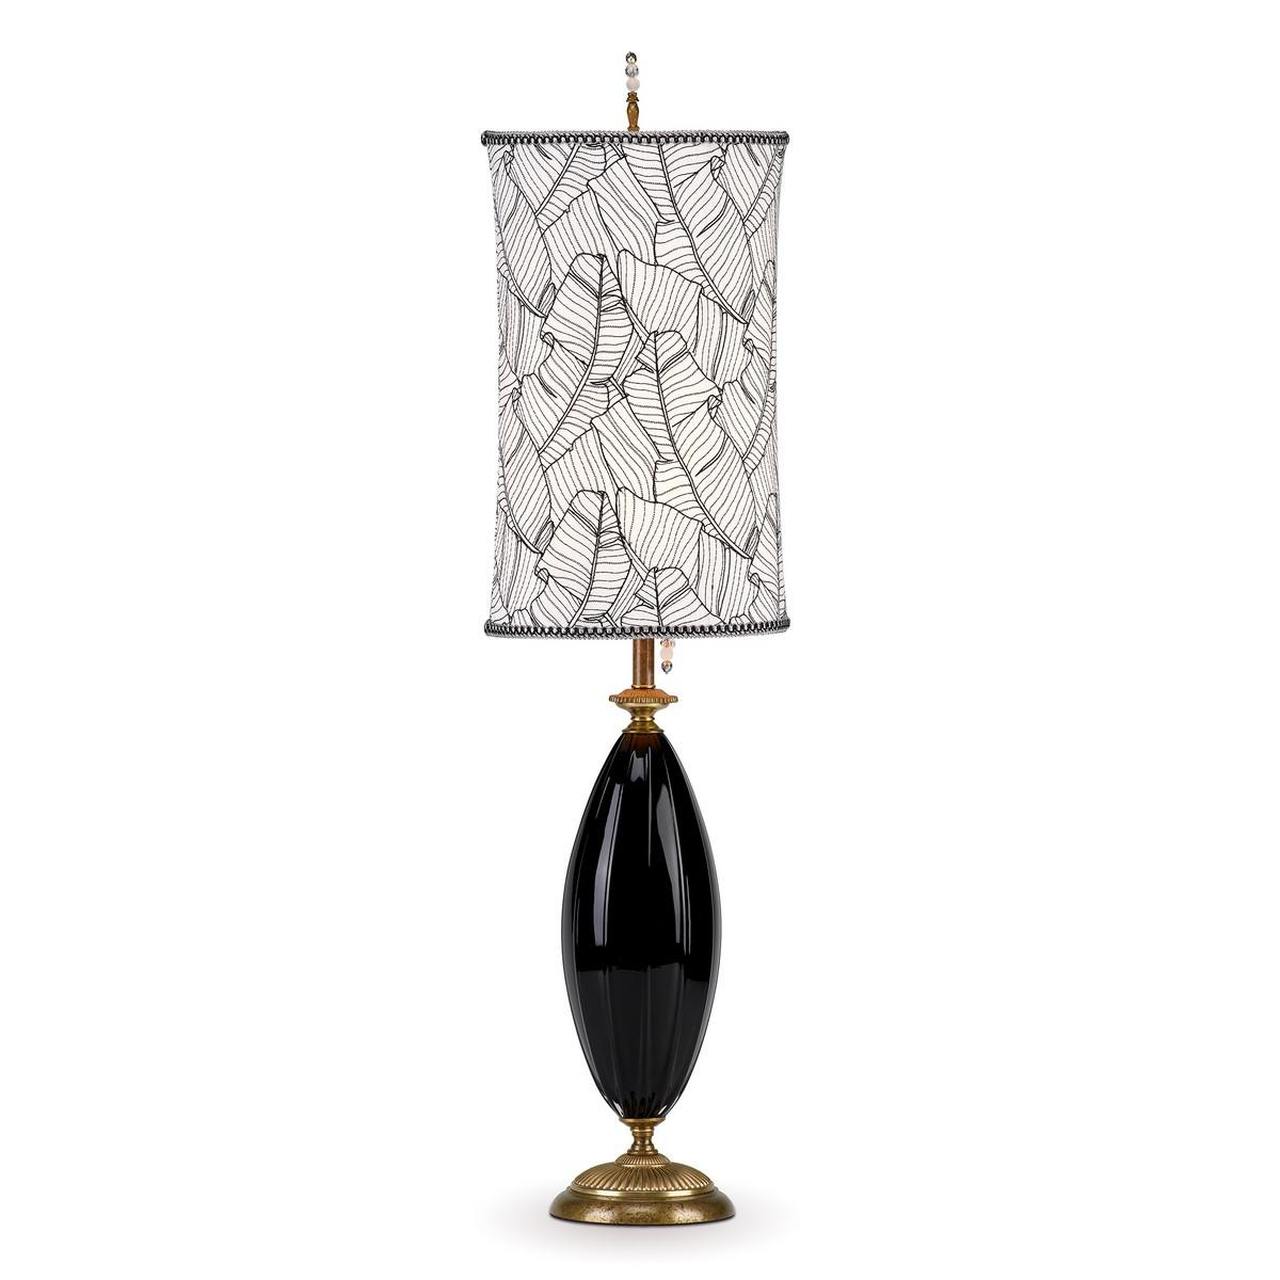 Molly - Table Lamp